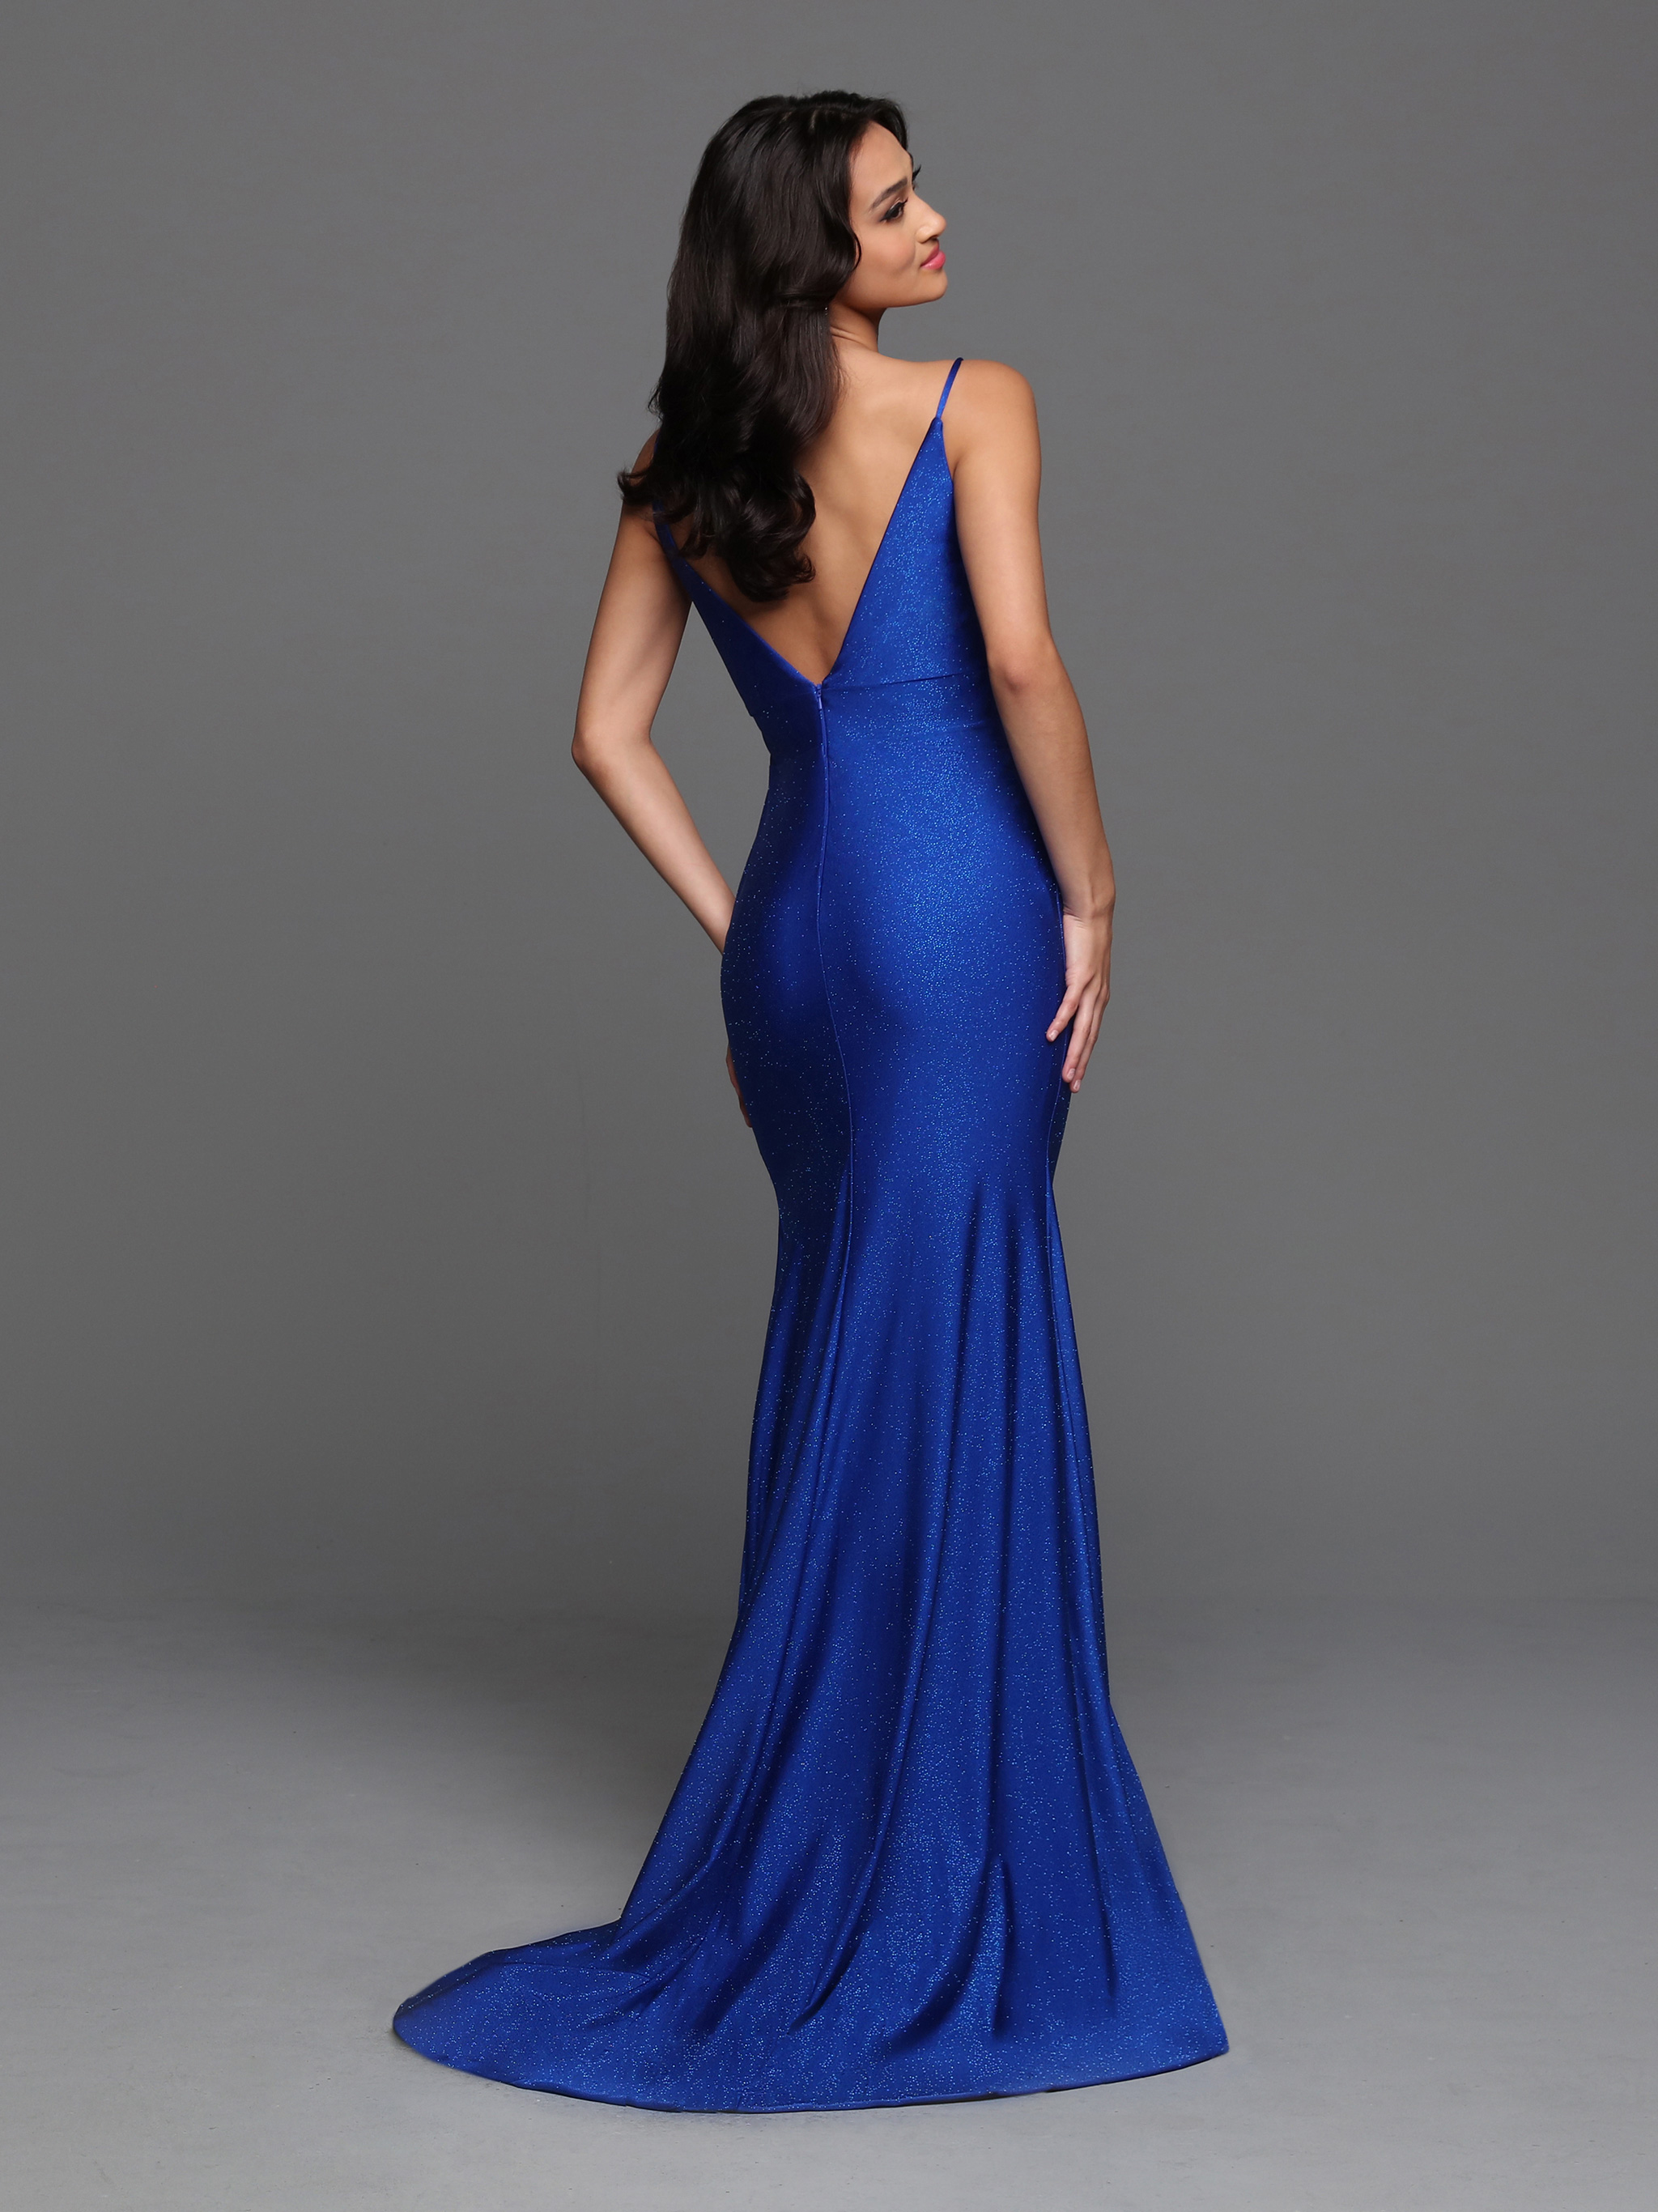 Image showing back view of style #72297